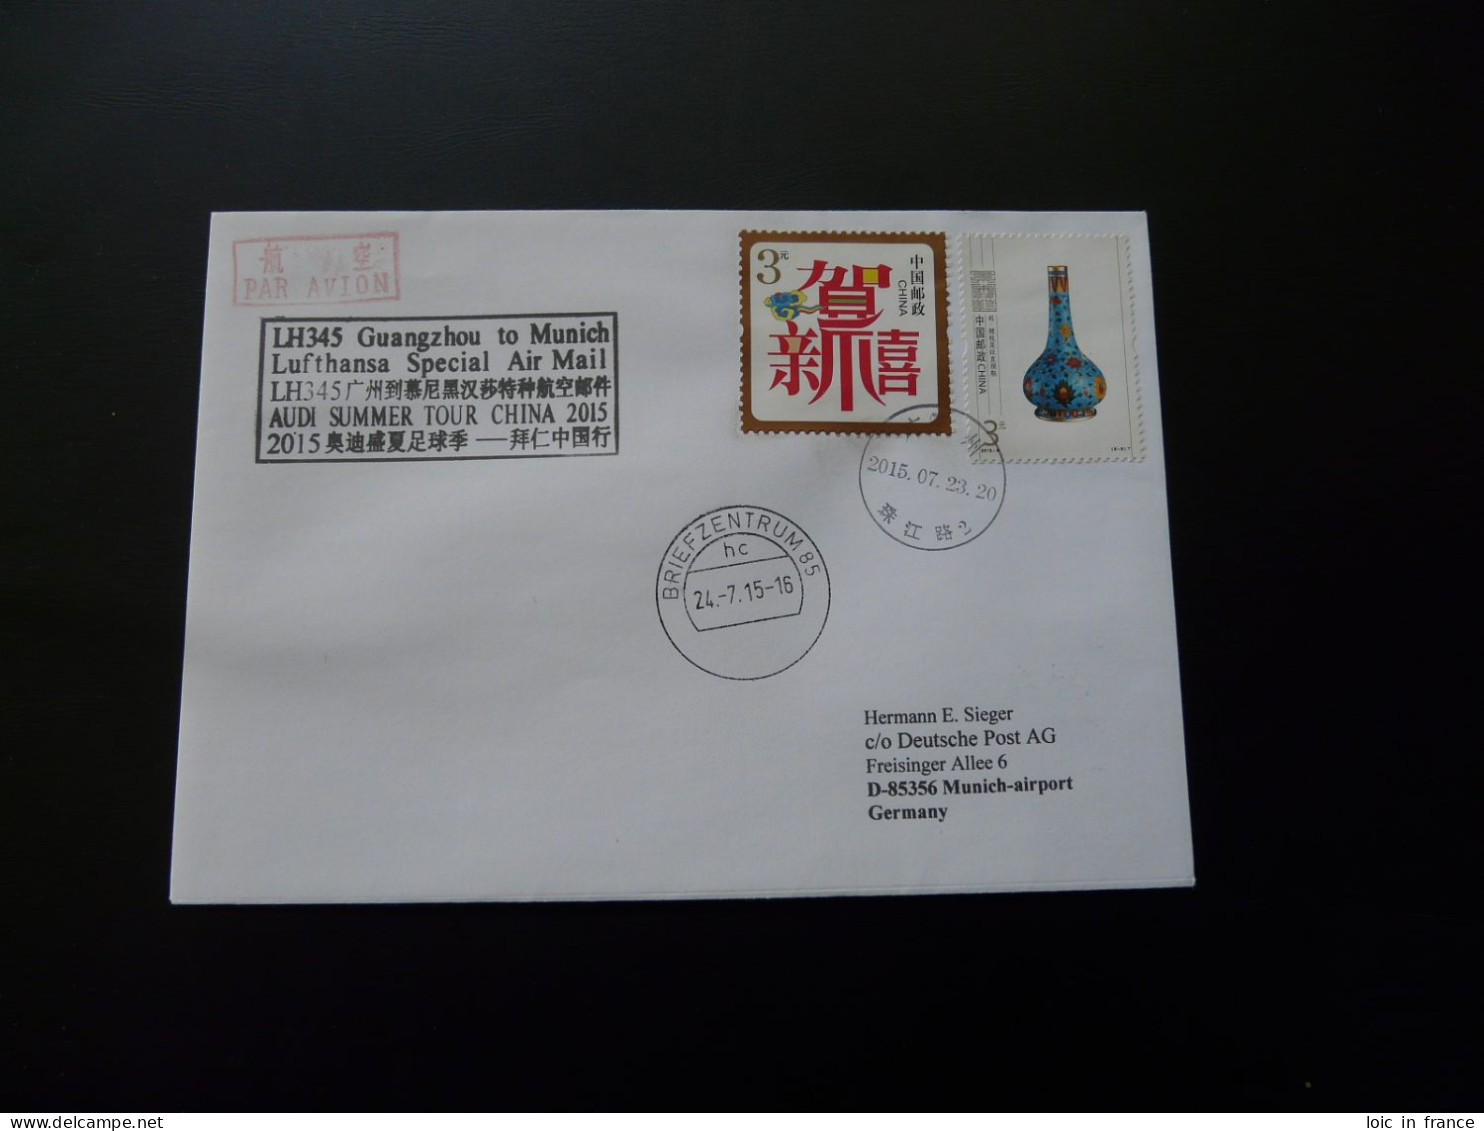 Lettre Vol Special Flight Cover Guangzhou To Munchen Audi Summer Tour China Lufthansa 2015 - Covers & Documents